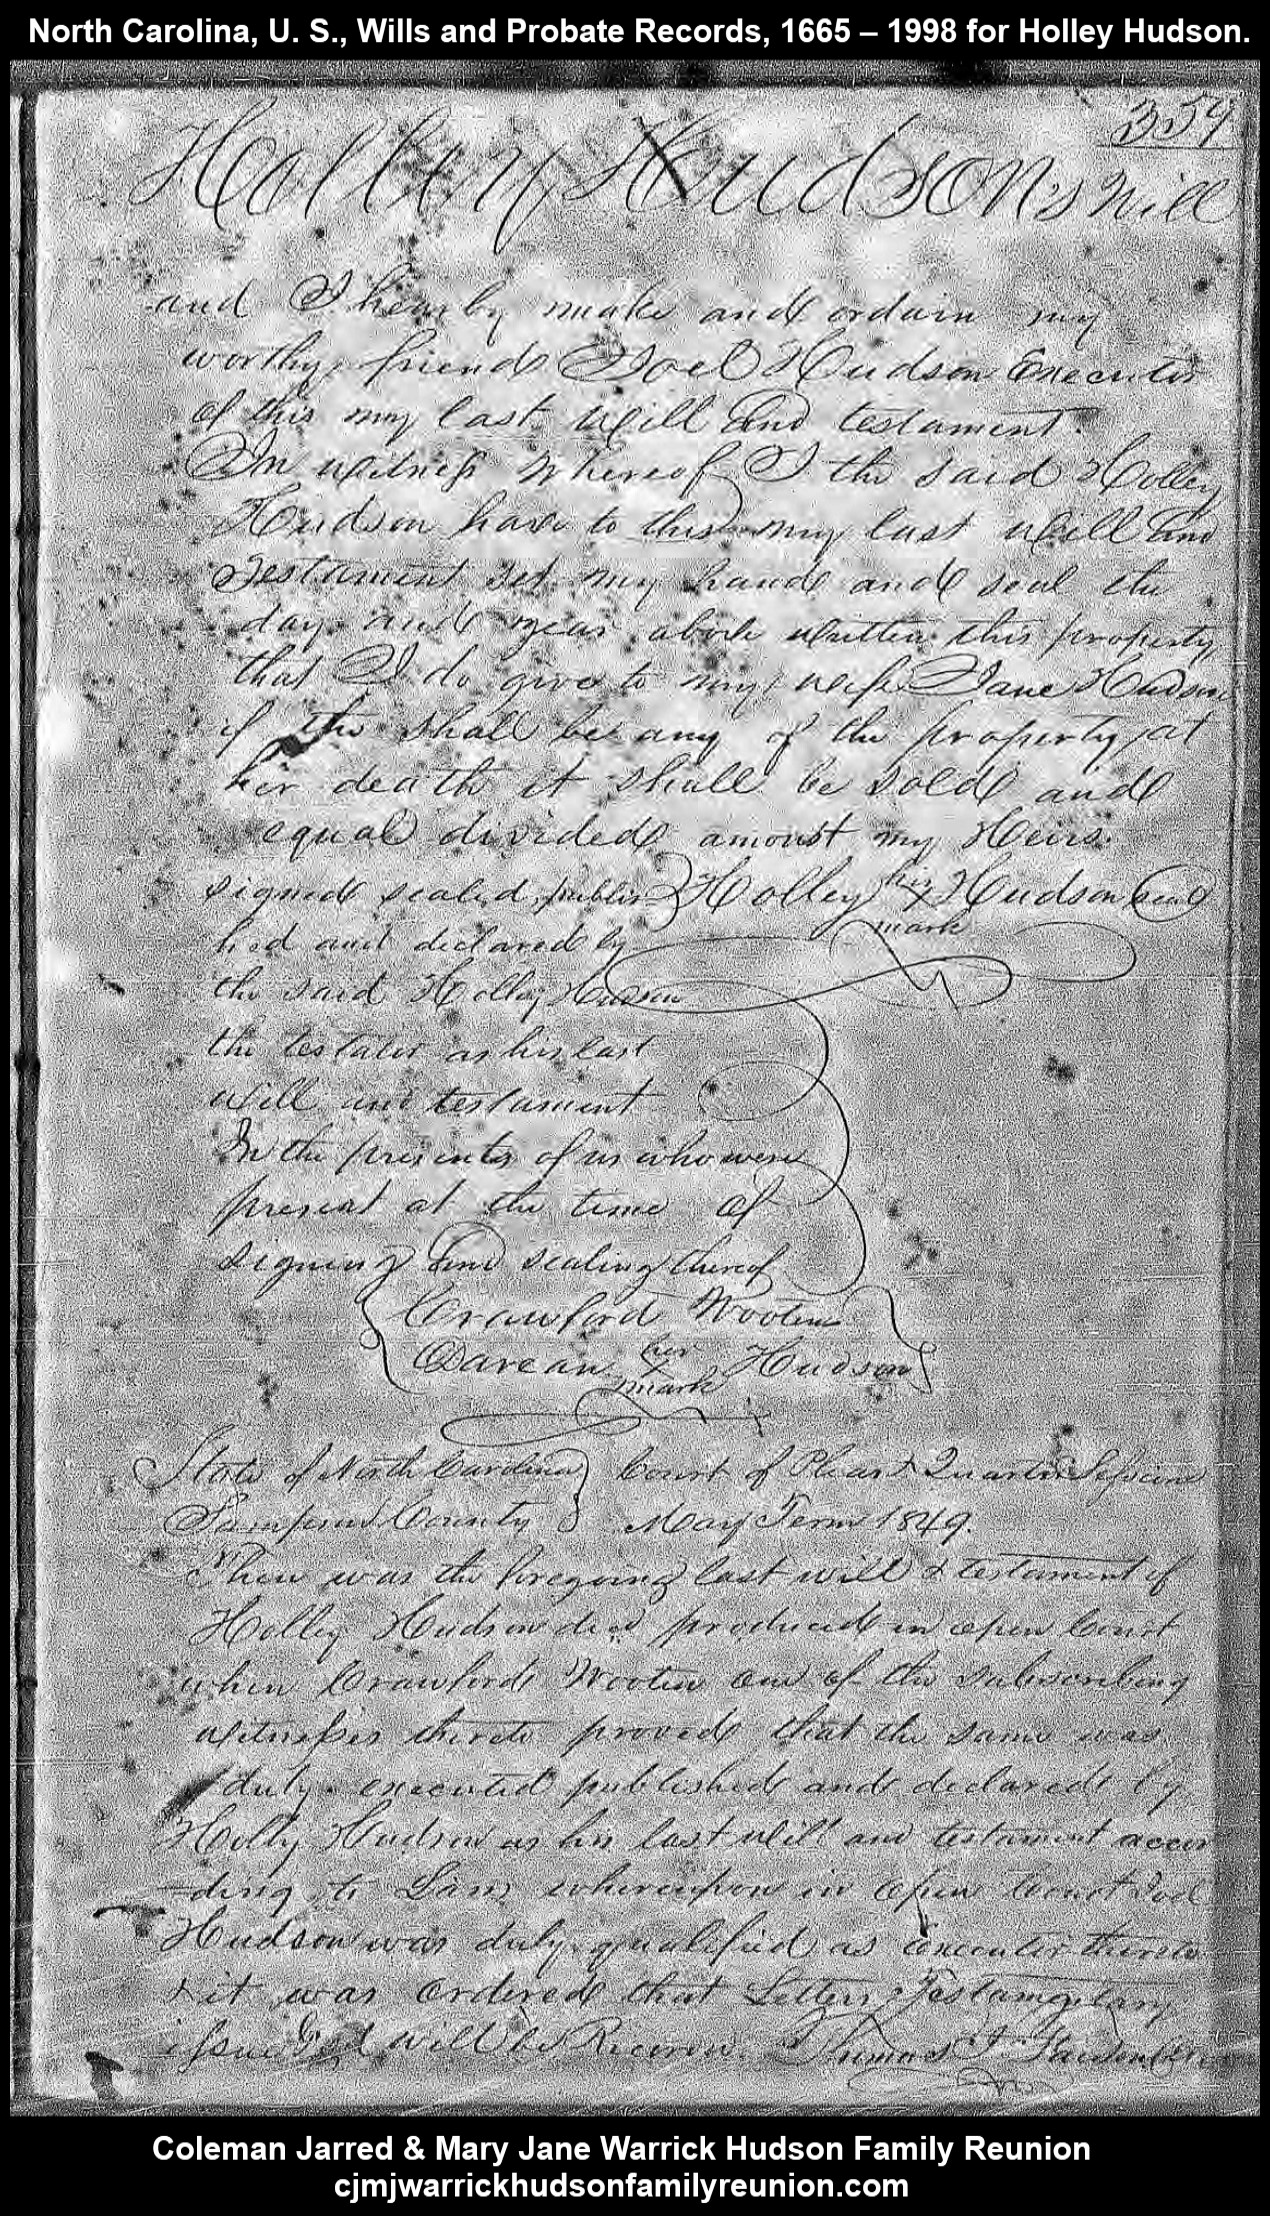 1849, 4-23 -  Holley Hudson's Will (Father of CJ) - (Page 2 of 2)